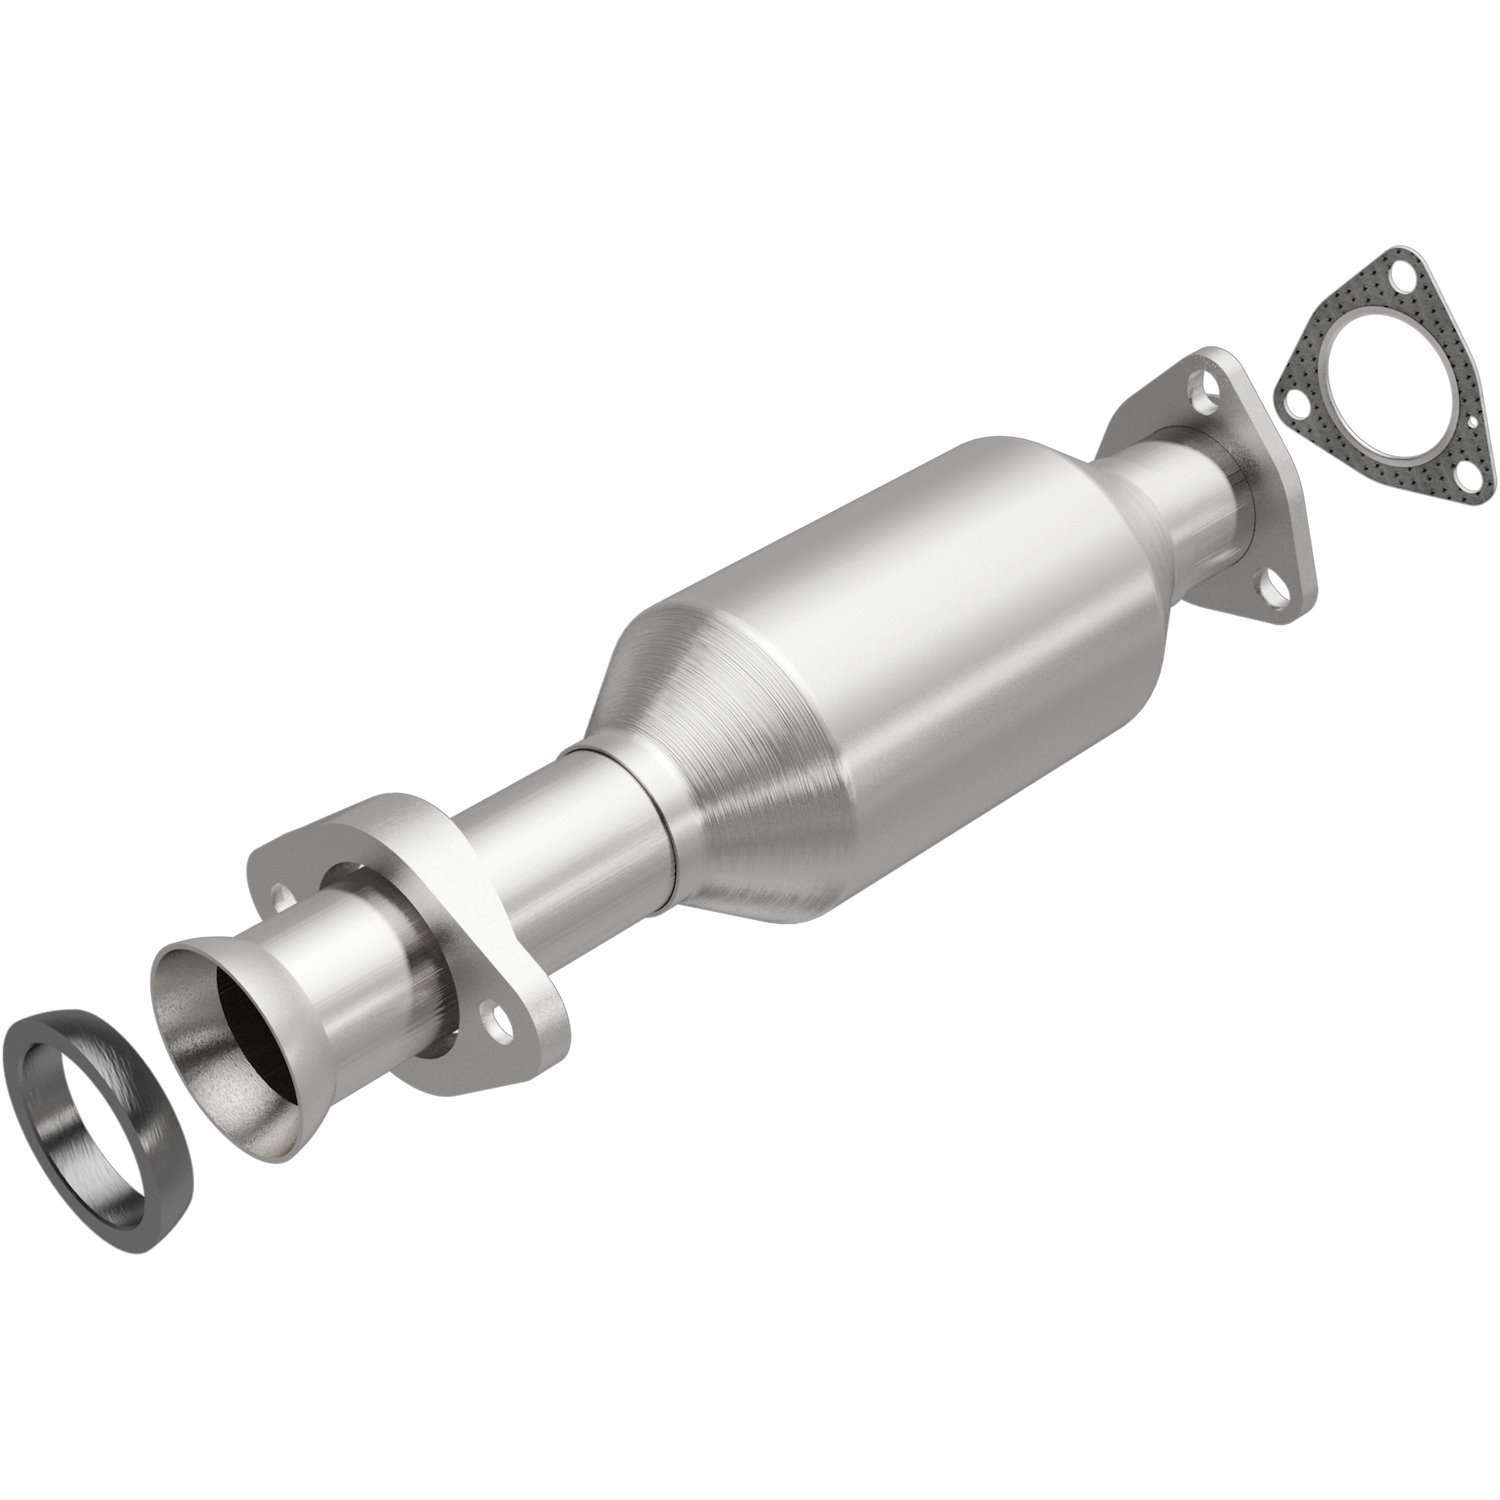 California Grade CARB Compliant Direct-Fit Catalytic Converter 3322636